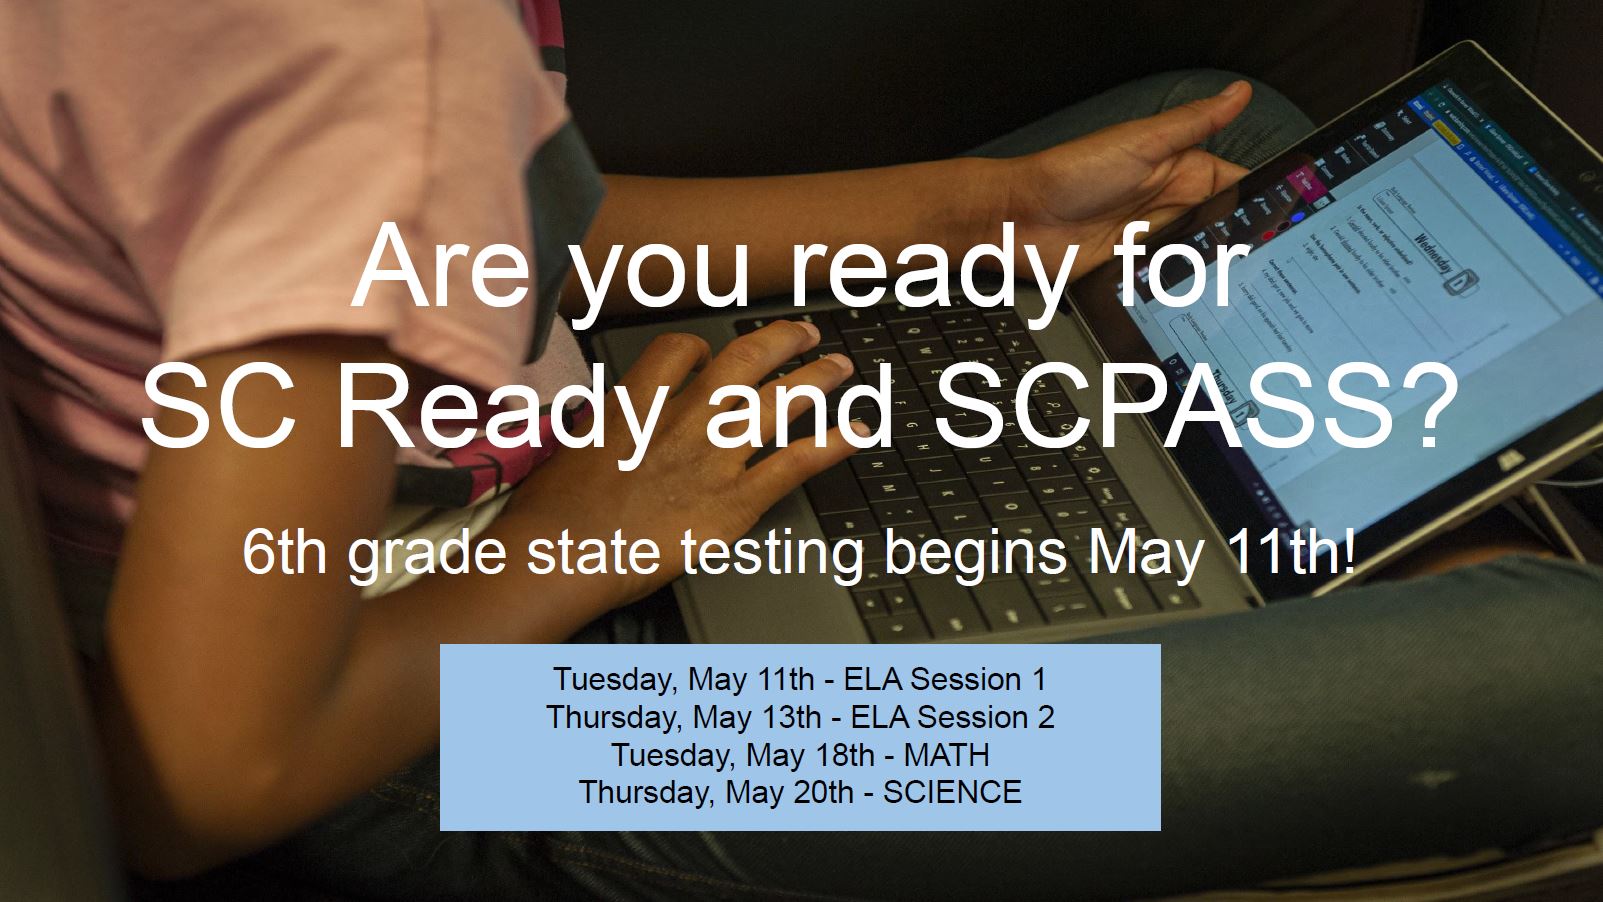 SC Ready Testing Dates (3rd, 4th, 5th and 6th grade)